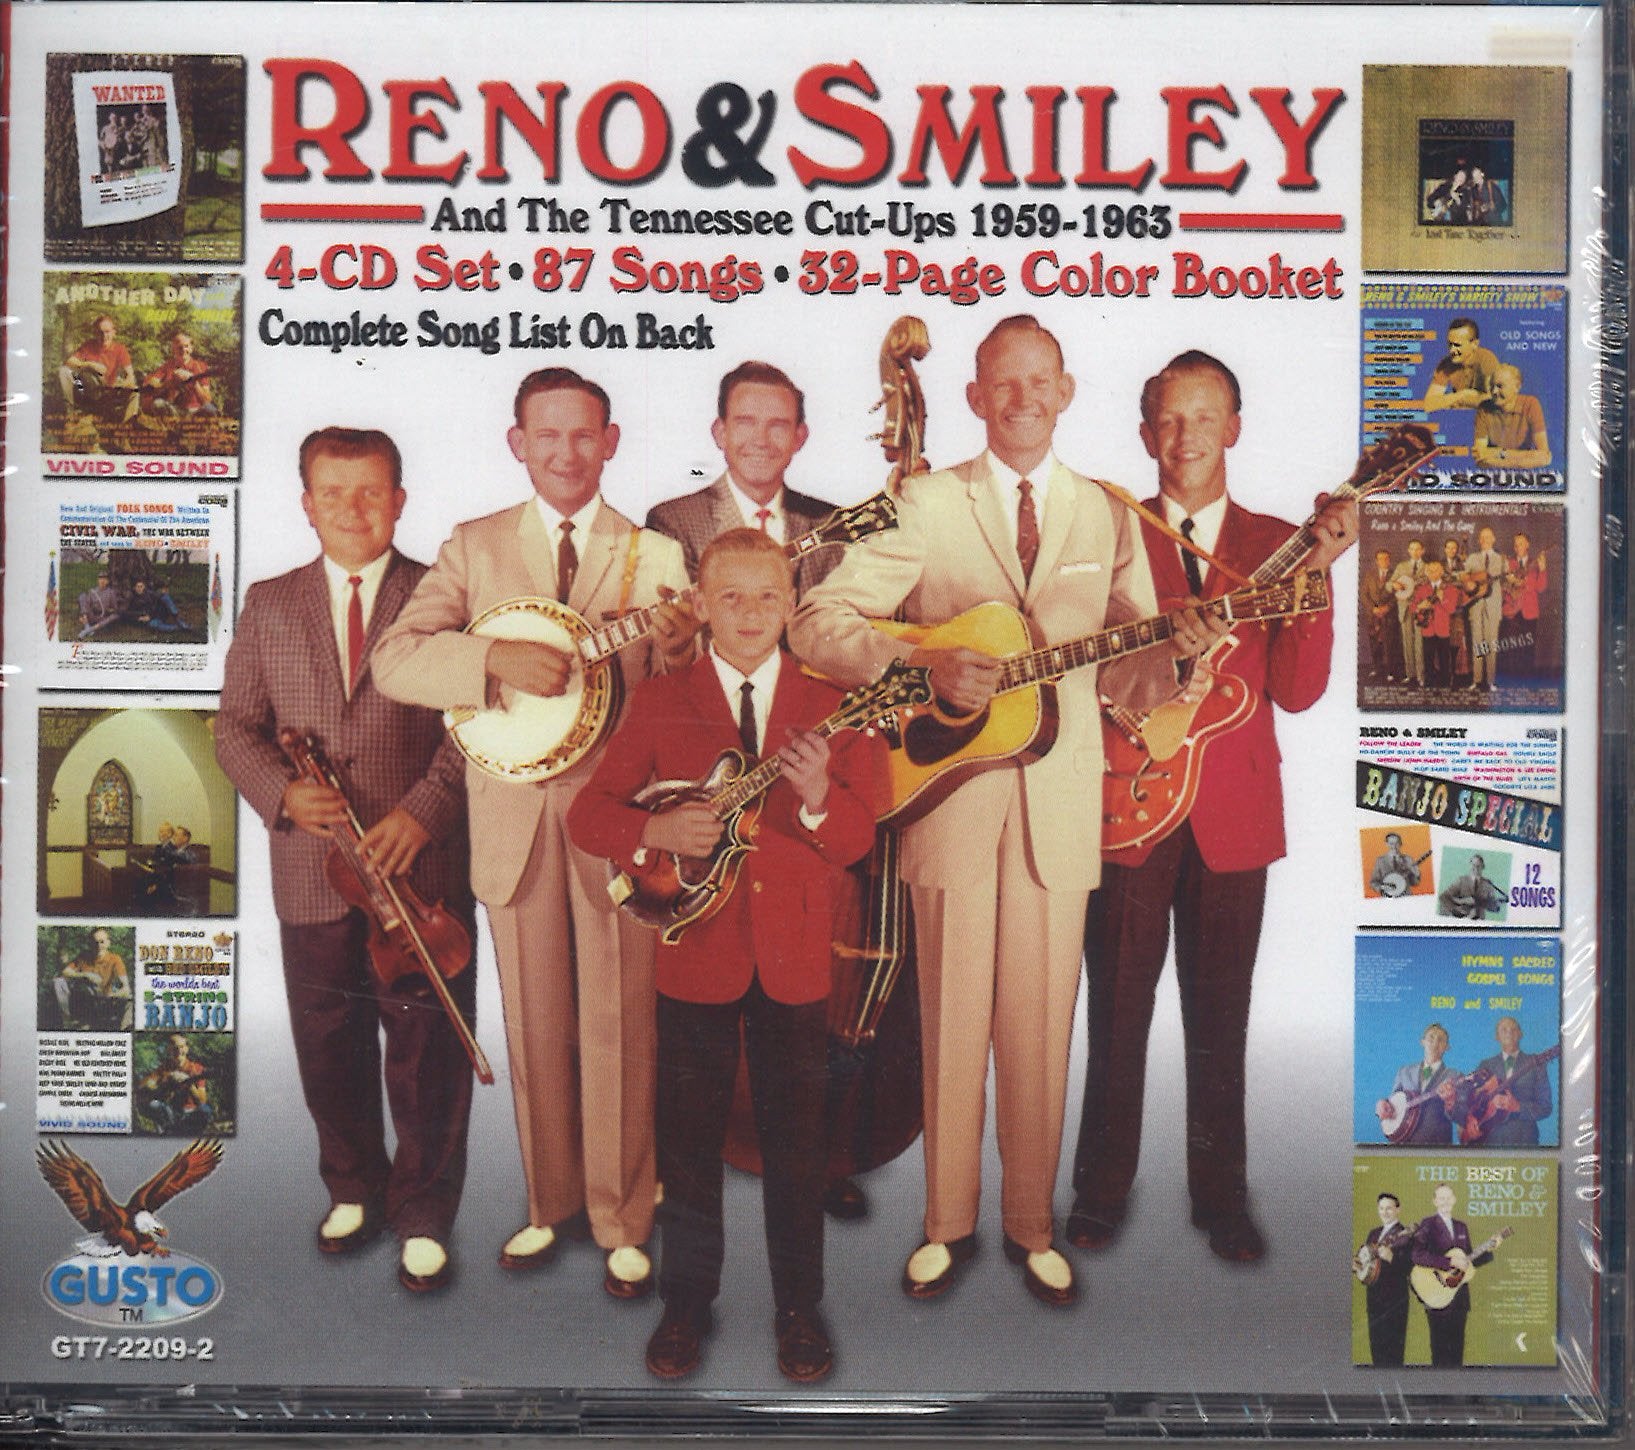 Reno & Smiley And The Tennessee Cut Ups 1959-1963: 4 CD Set